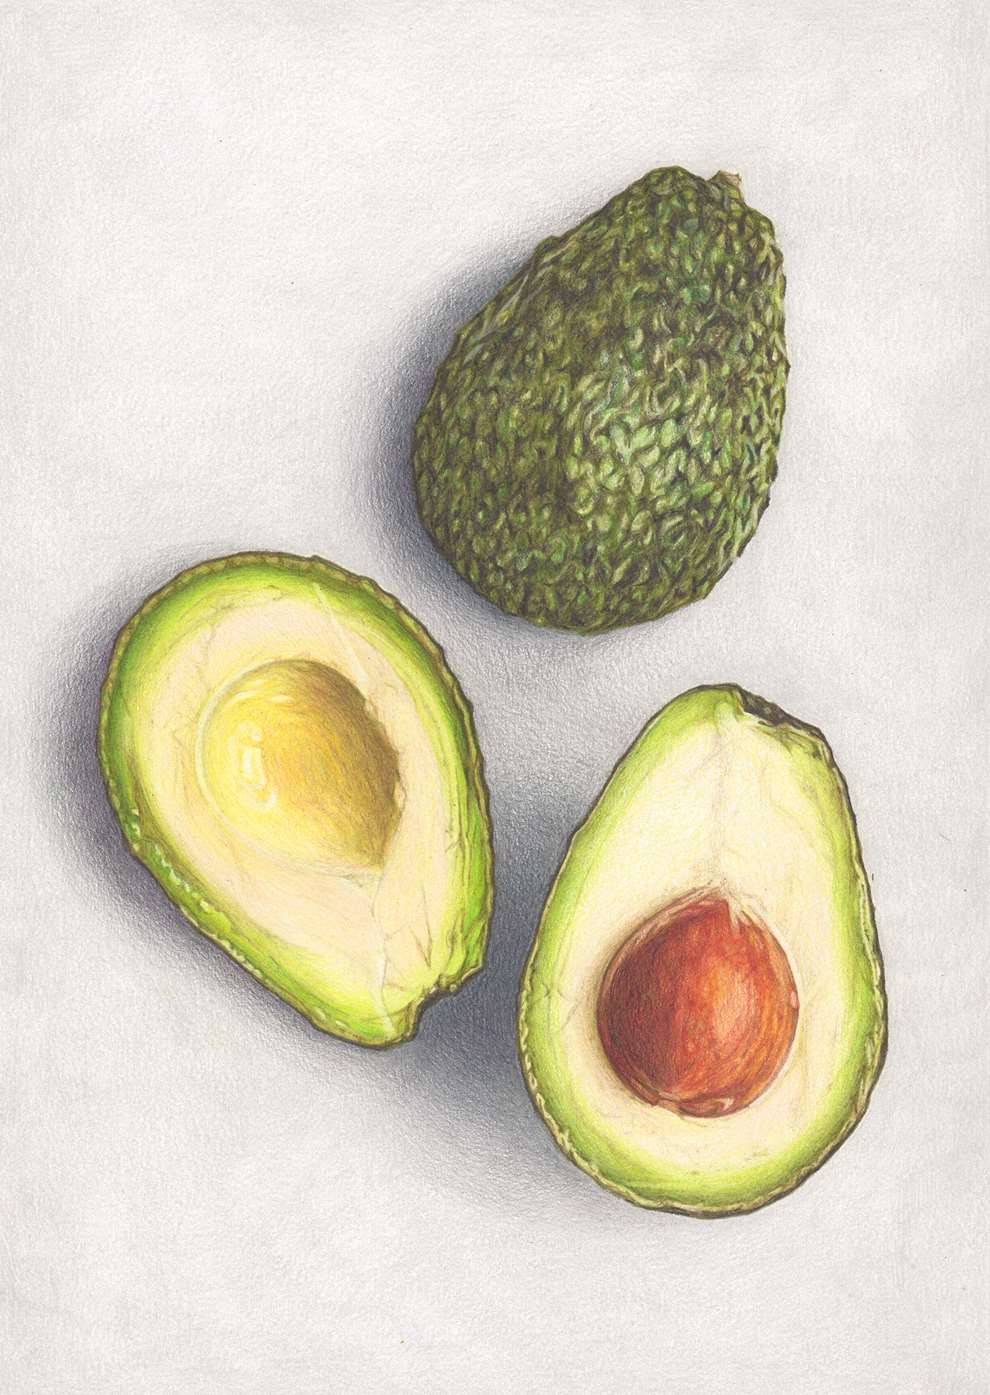 Pencil on Paper, A close-up pencil-drawn illustration of an avocado.